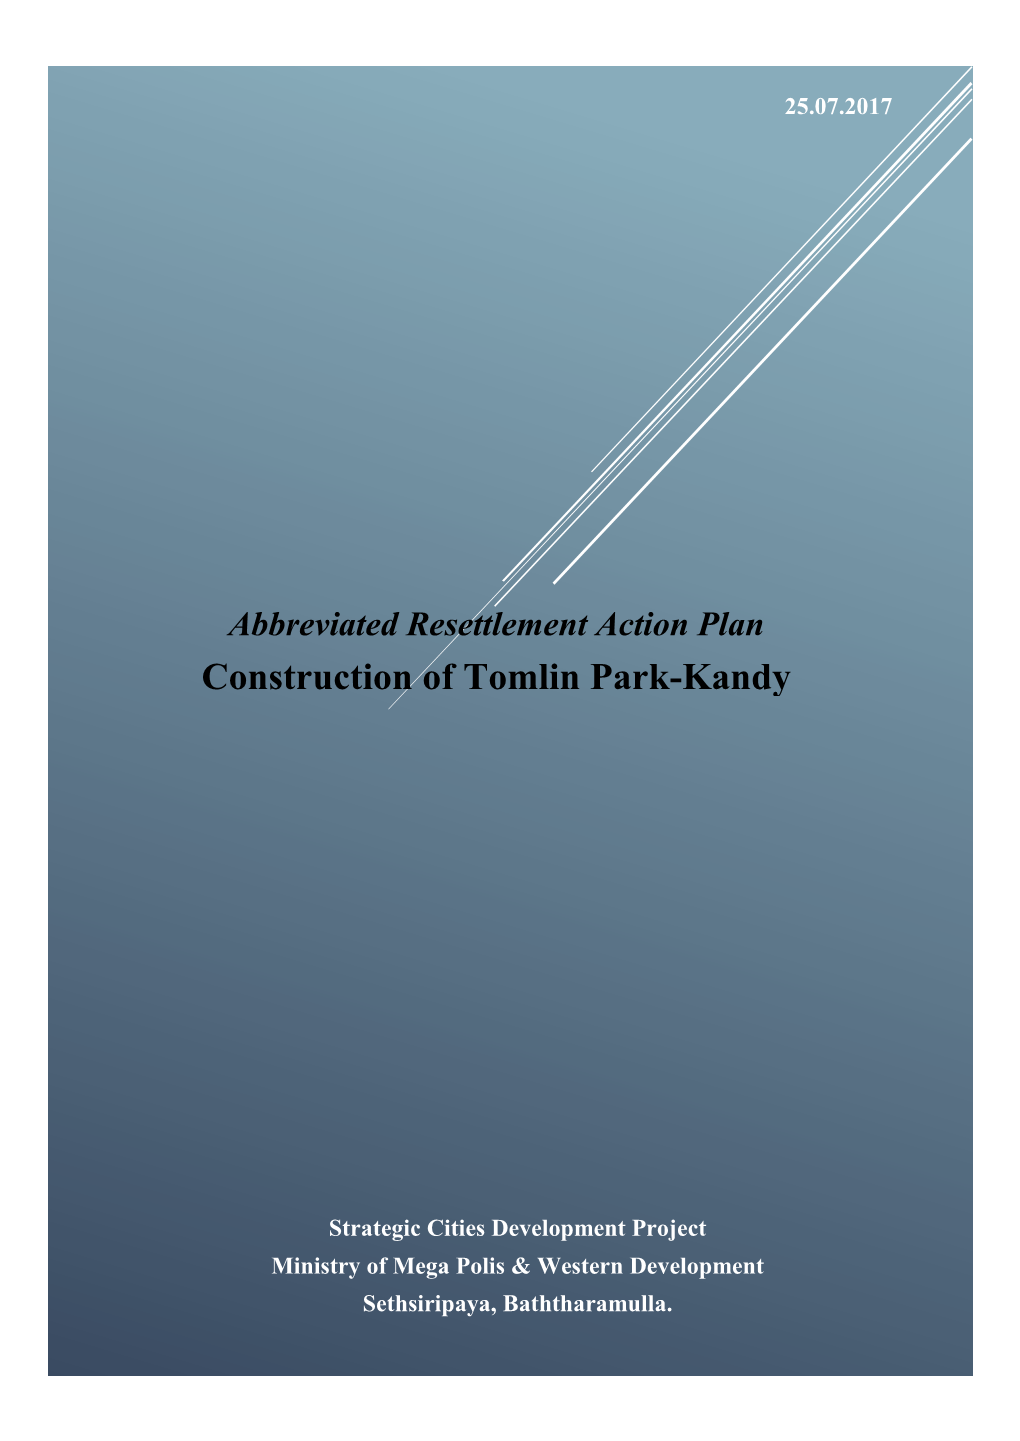 Abbreviated Resettlement Action Plan Construction of Tomlin Park-Kandy